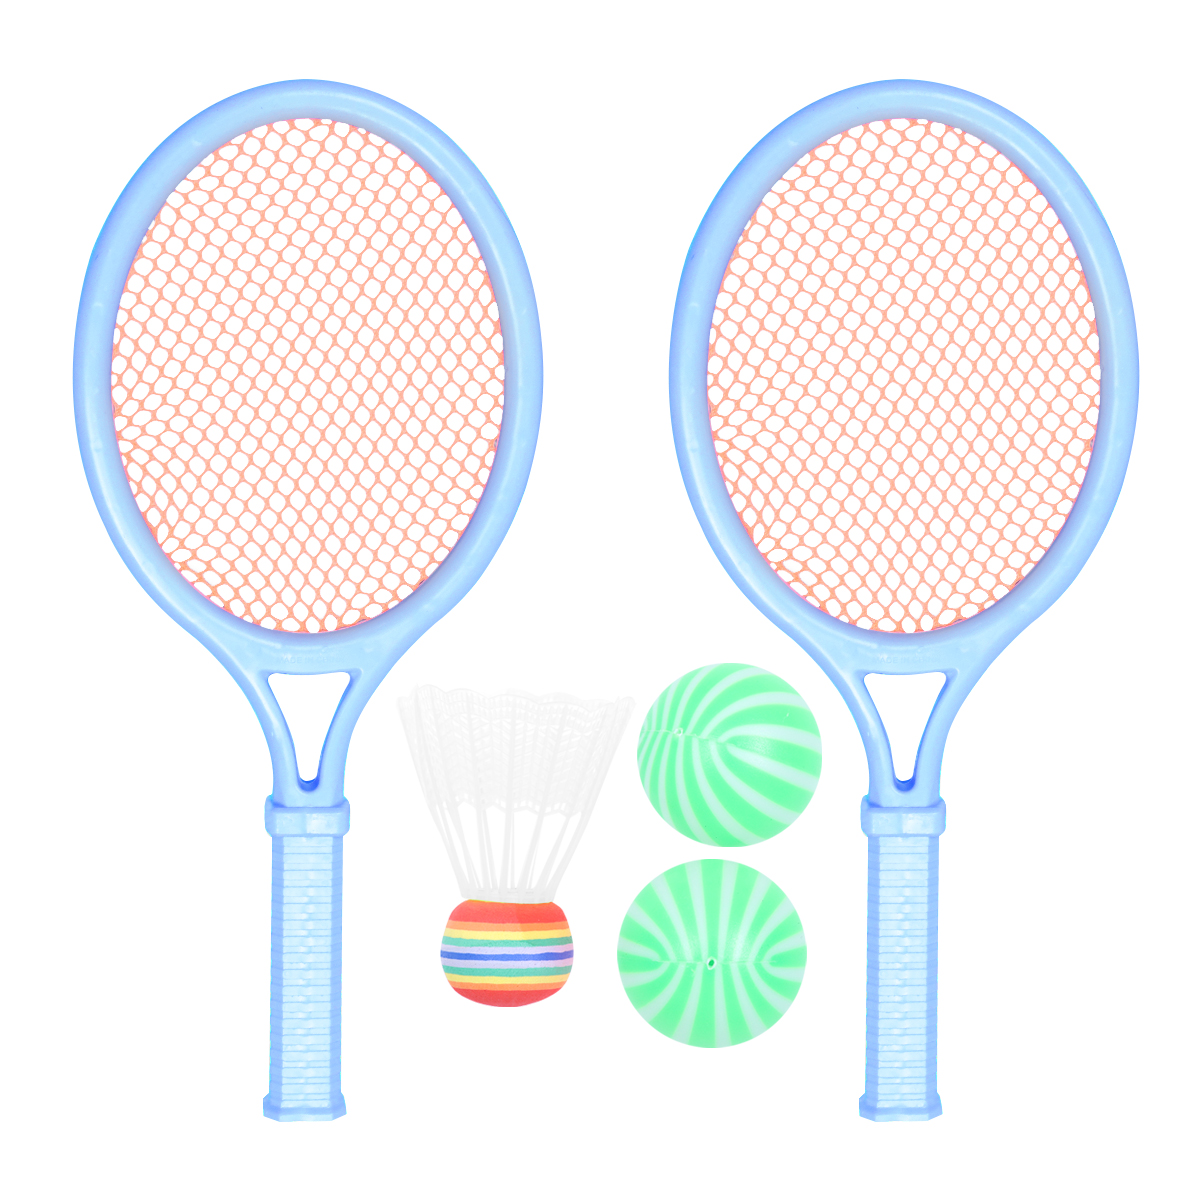 2pcs Tennis Racket Toy Cartoon Style Racquet Funny Outdoor Activities Toy Fitness Equipment for Kids Playing